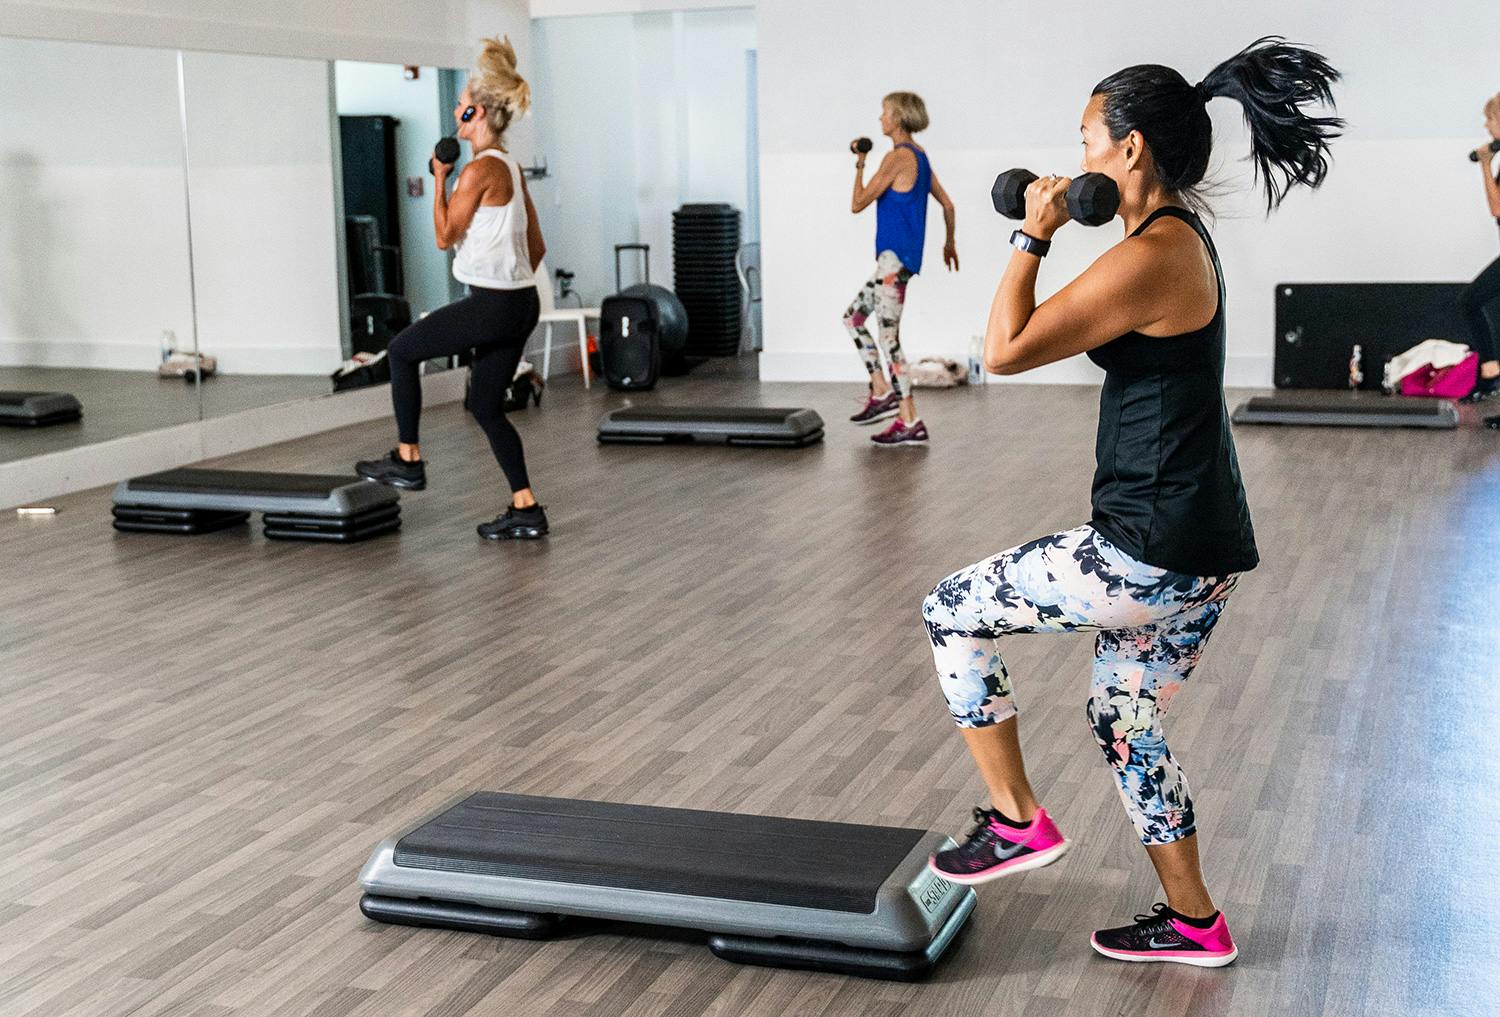 Members in a power sculpt class at the gym